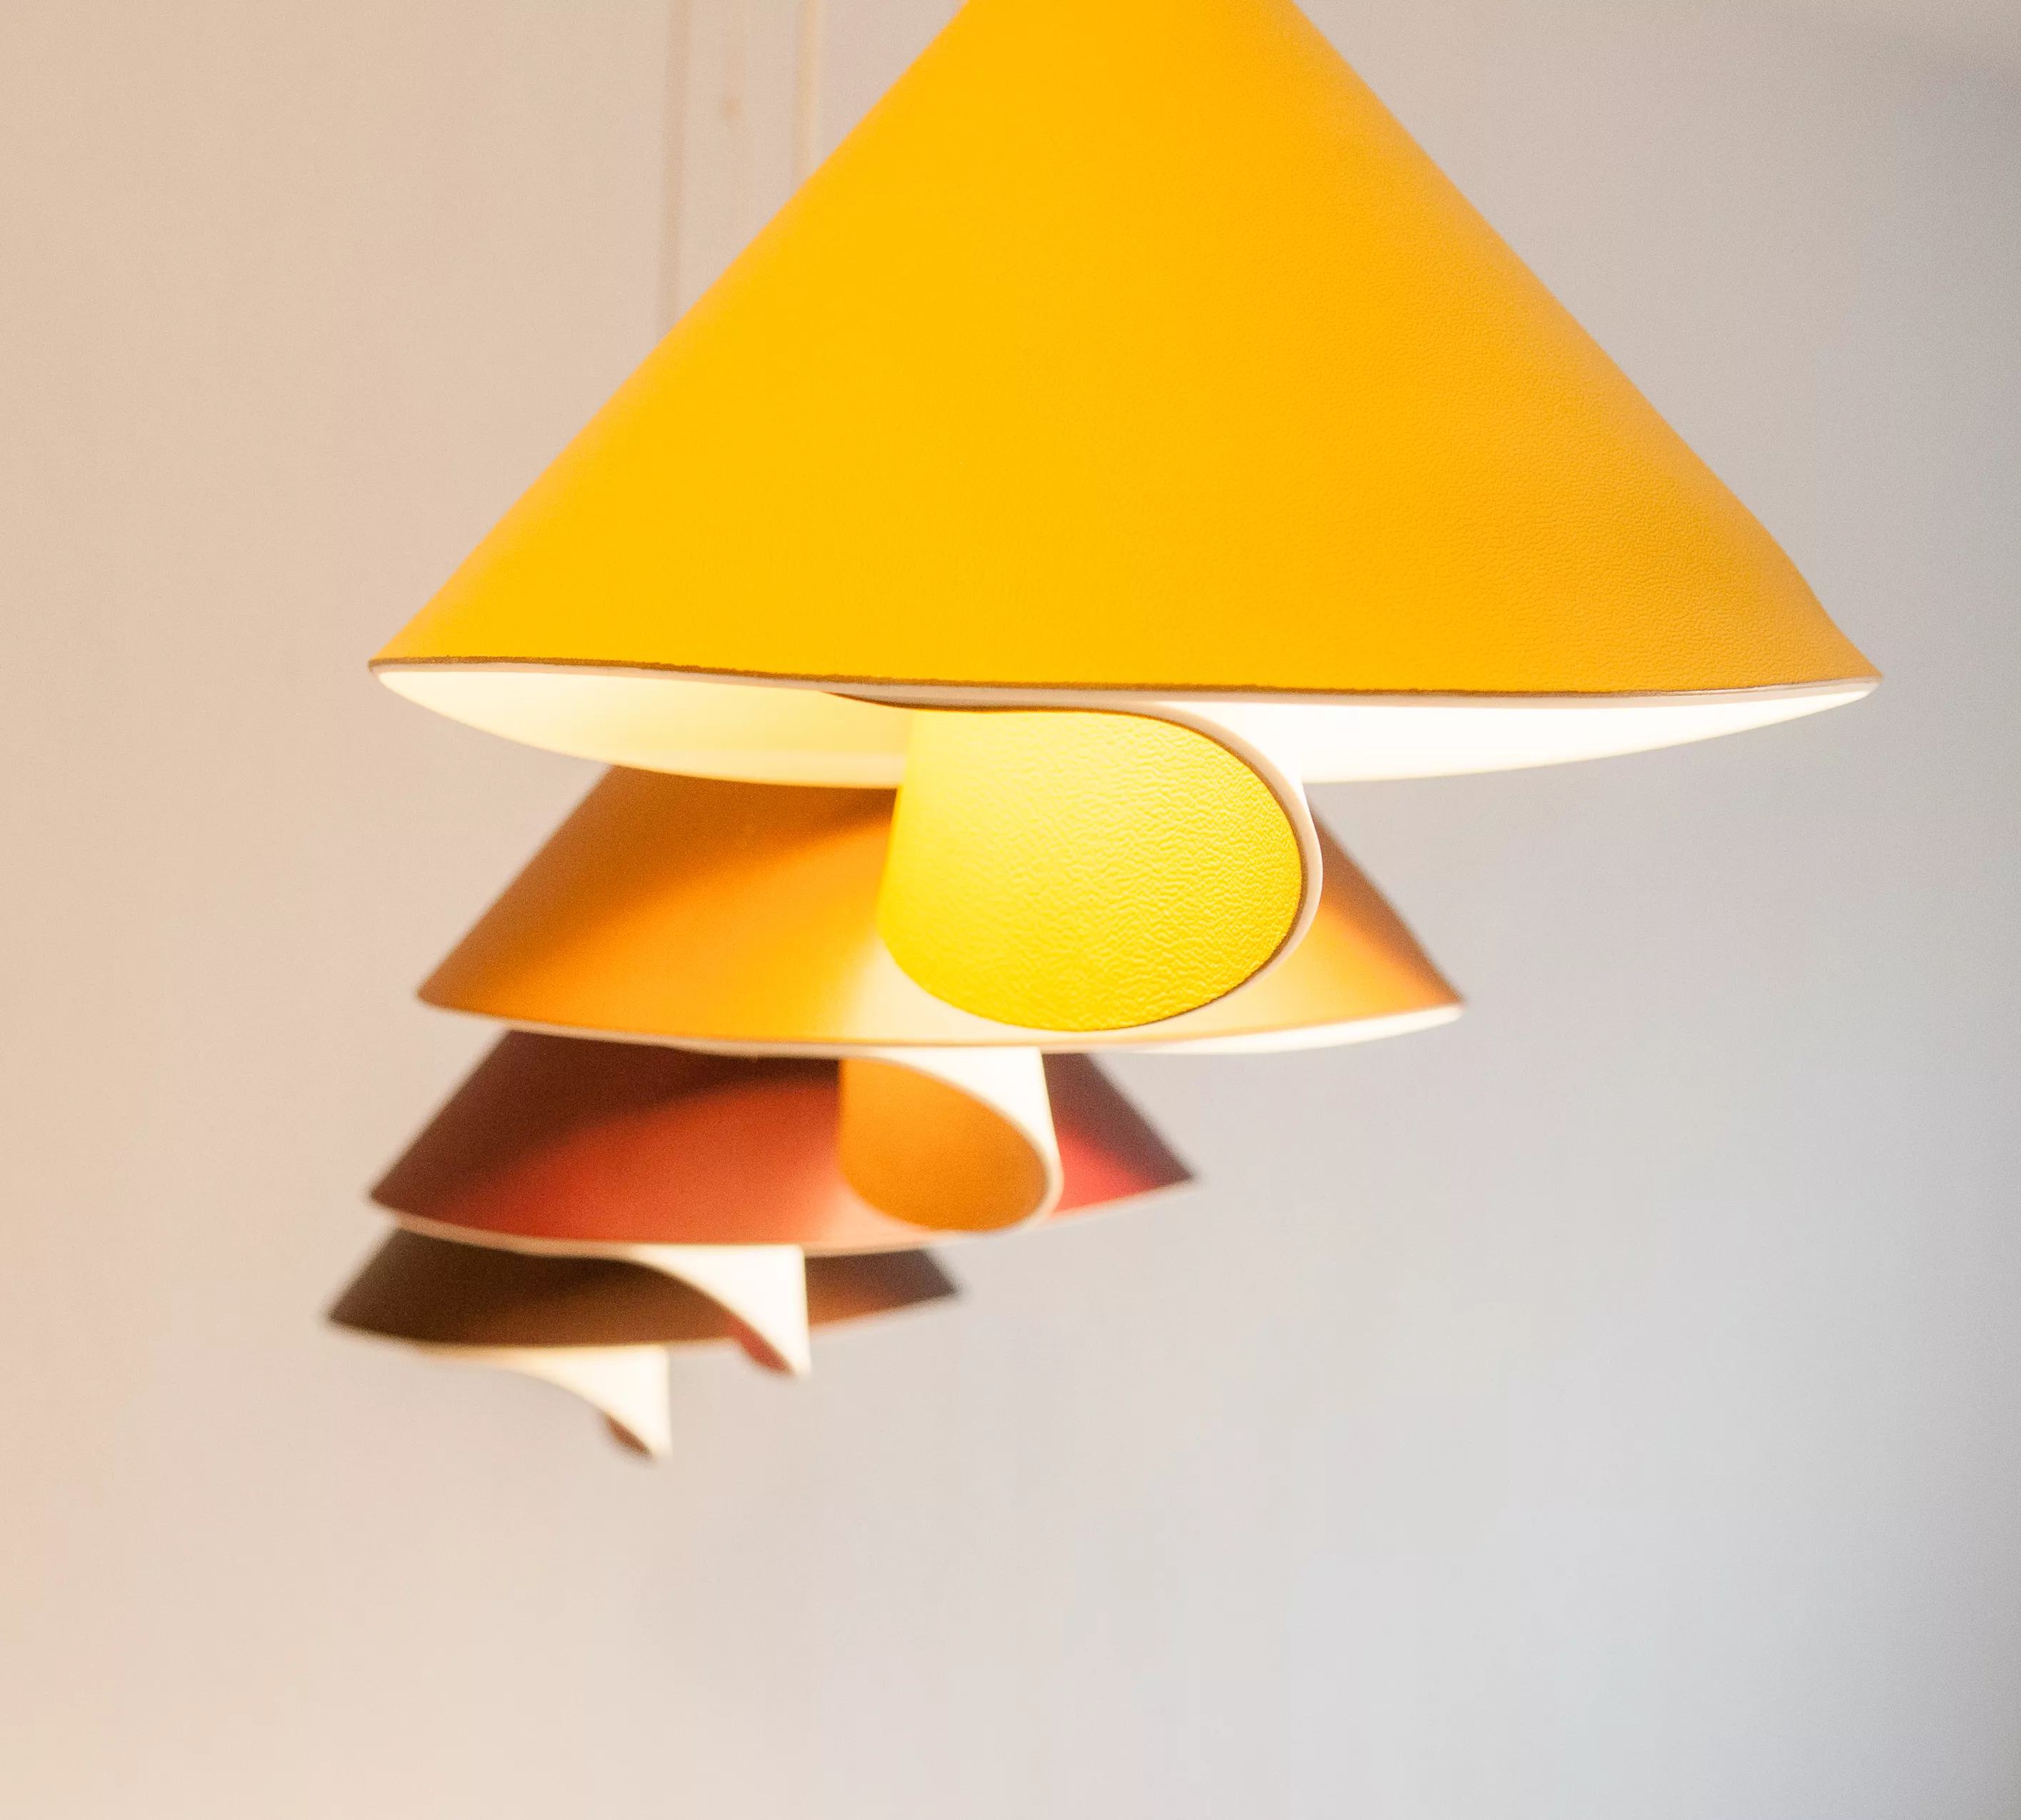 The return of the iconic Tulip lamp, with an elegant new pendant version